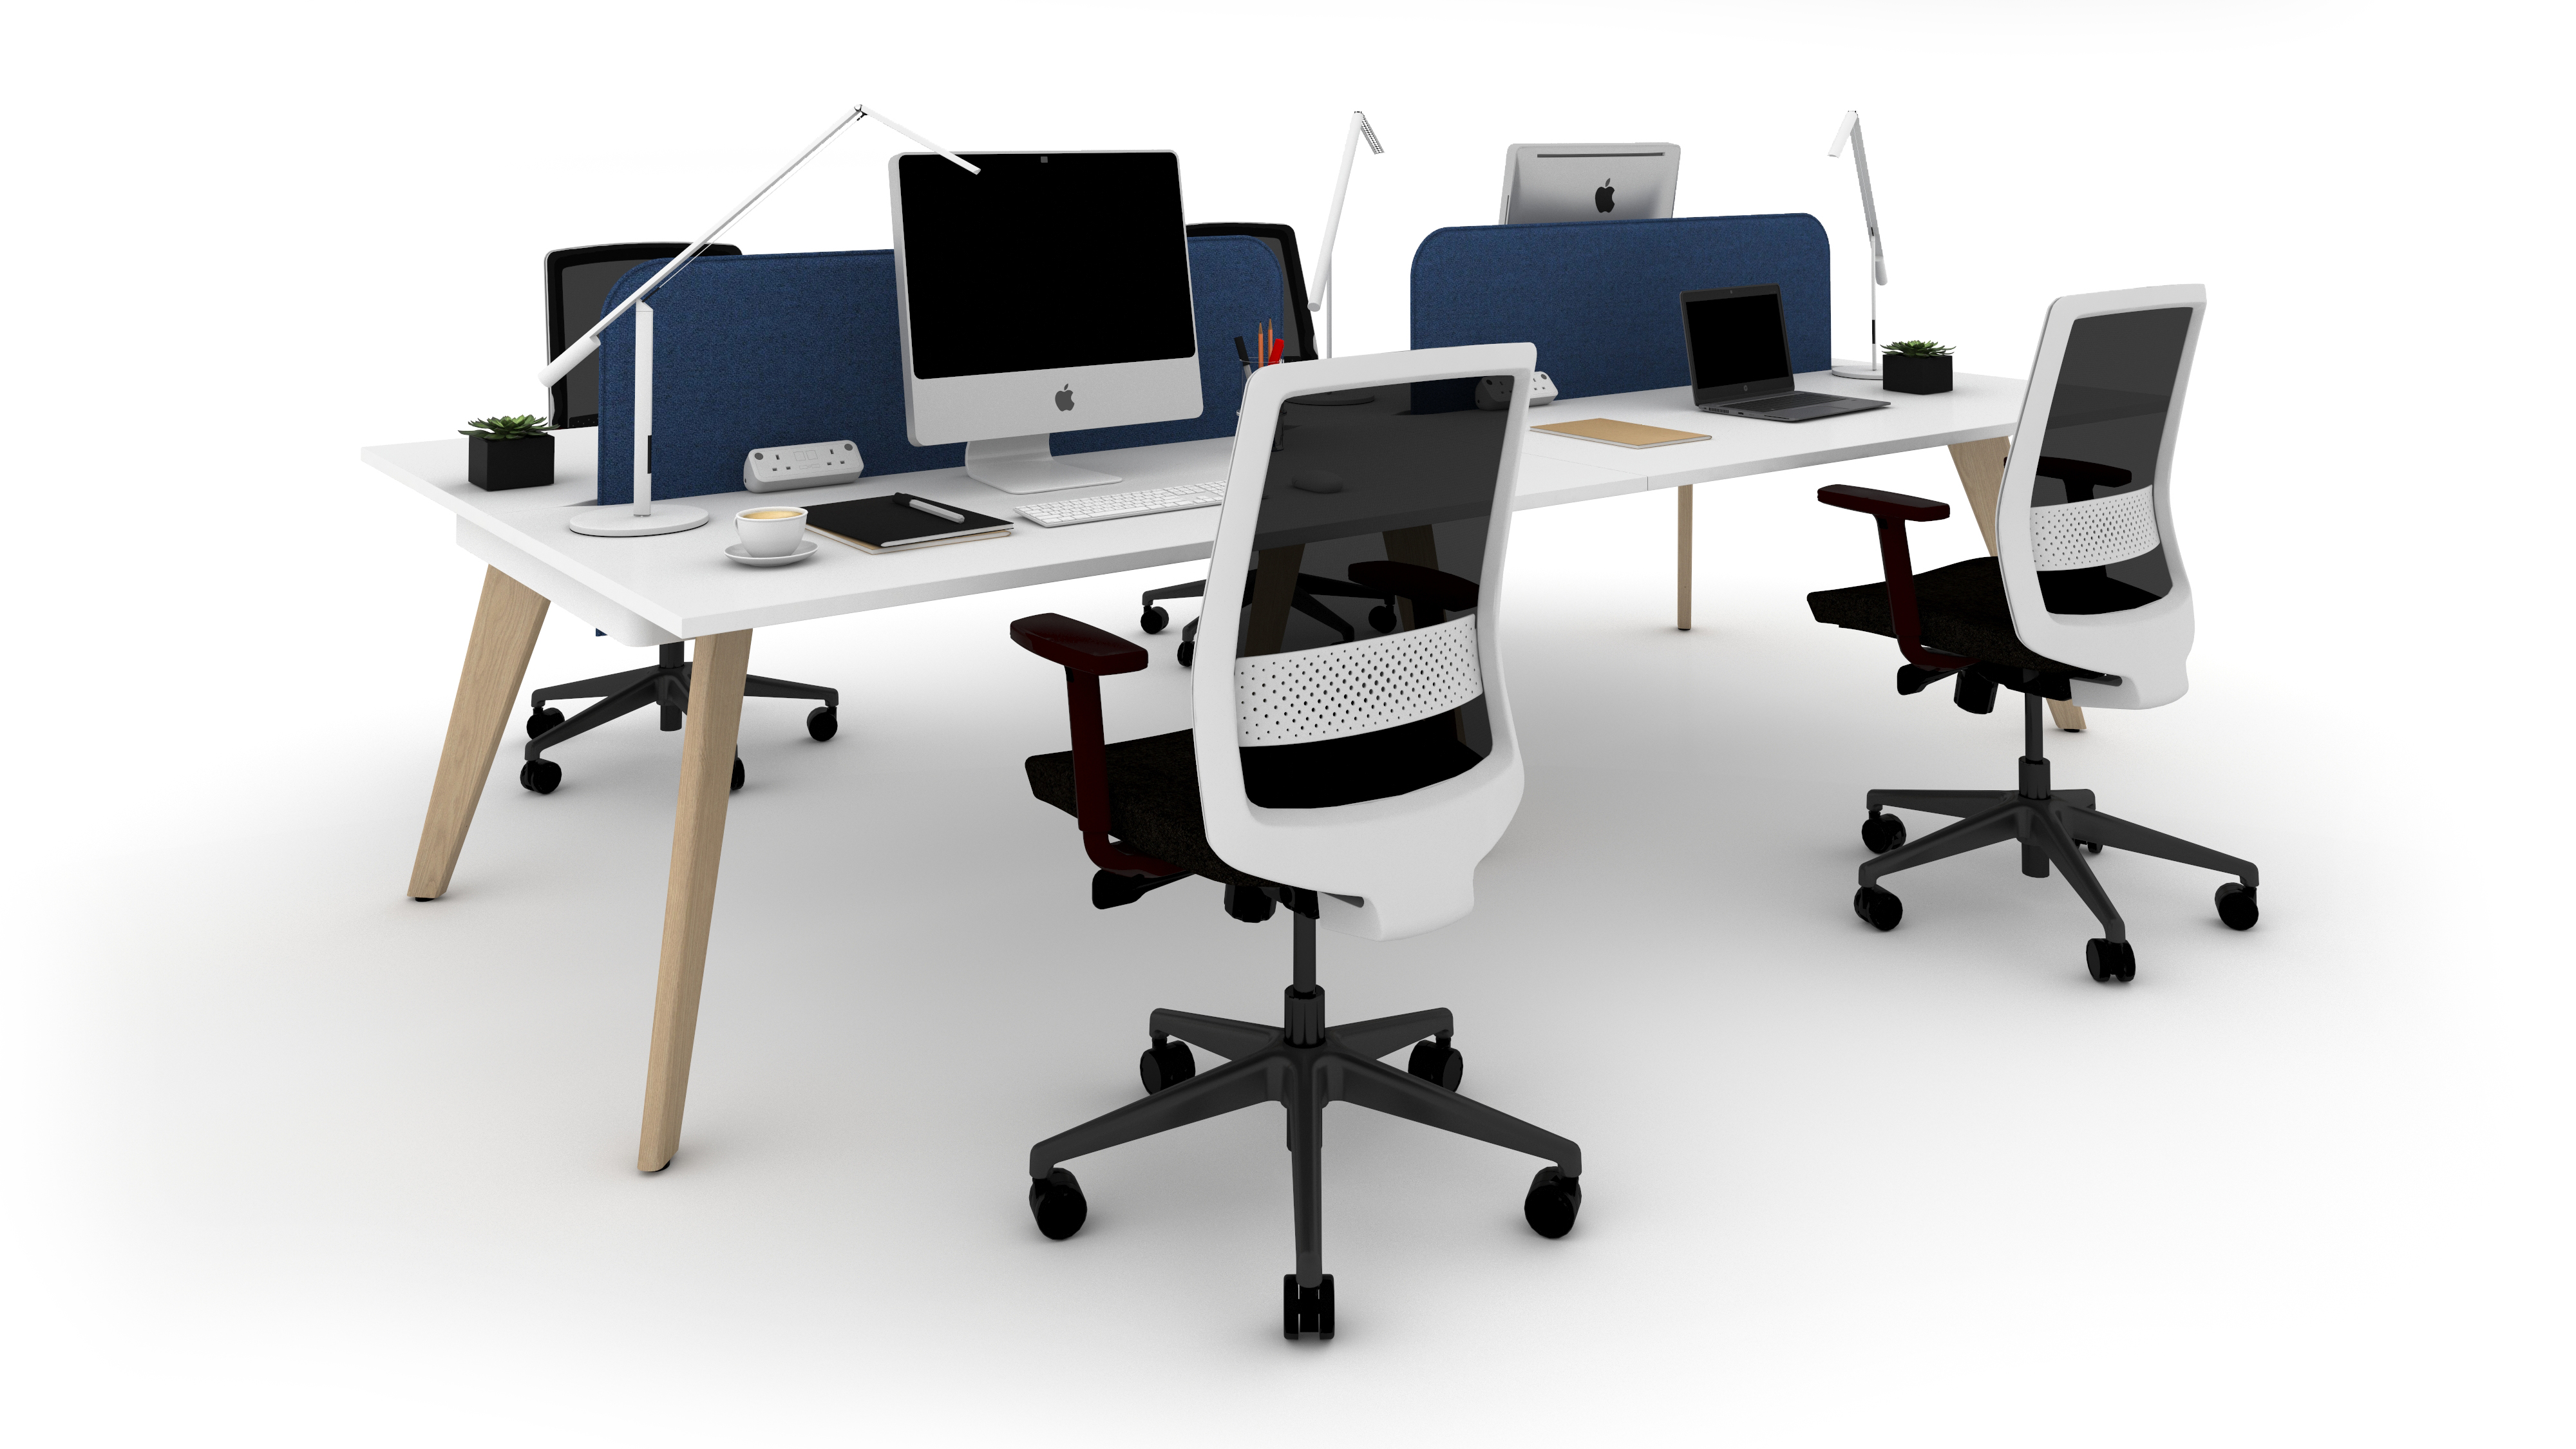 WS - Hub desk - 4pers - White top, Dressed